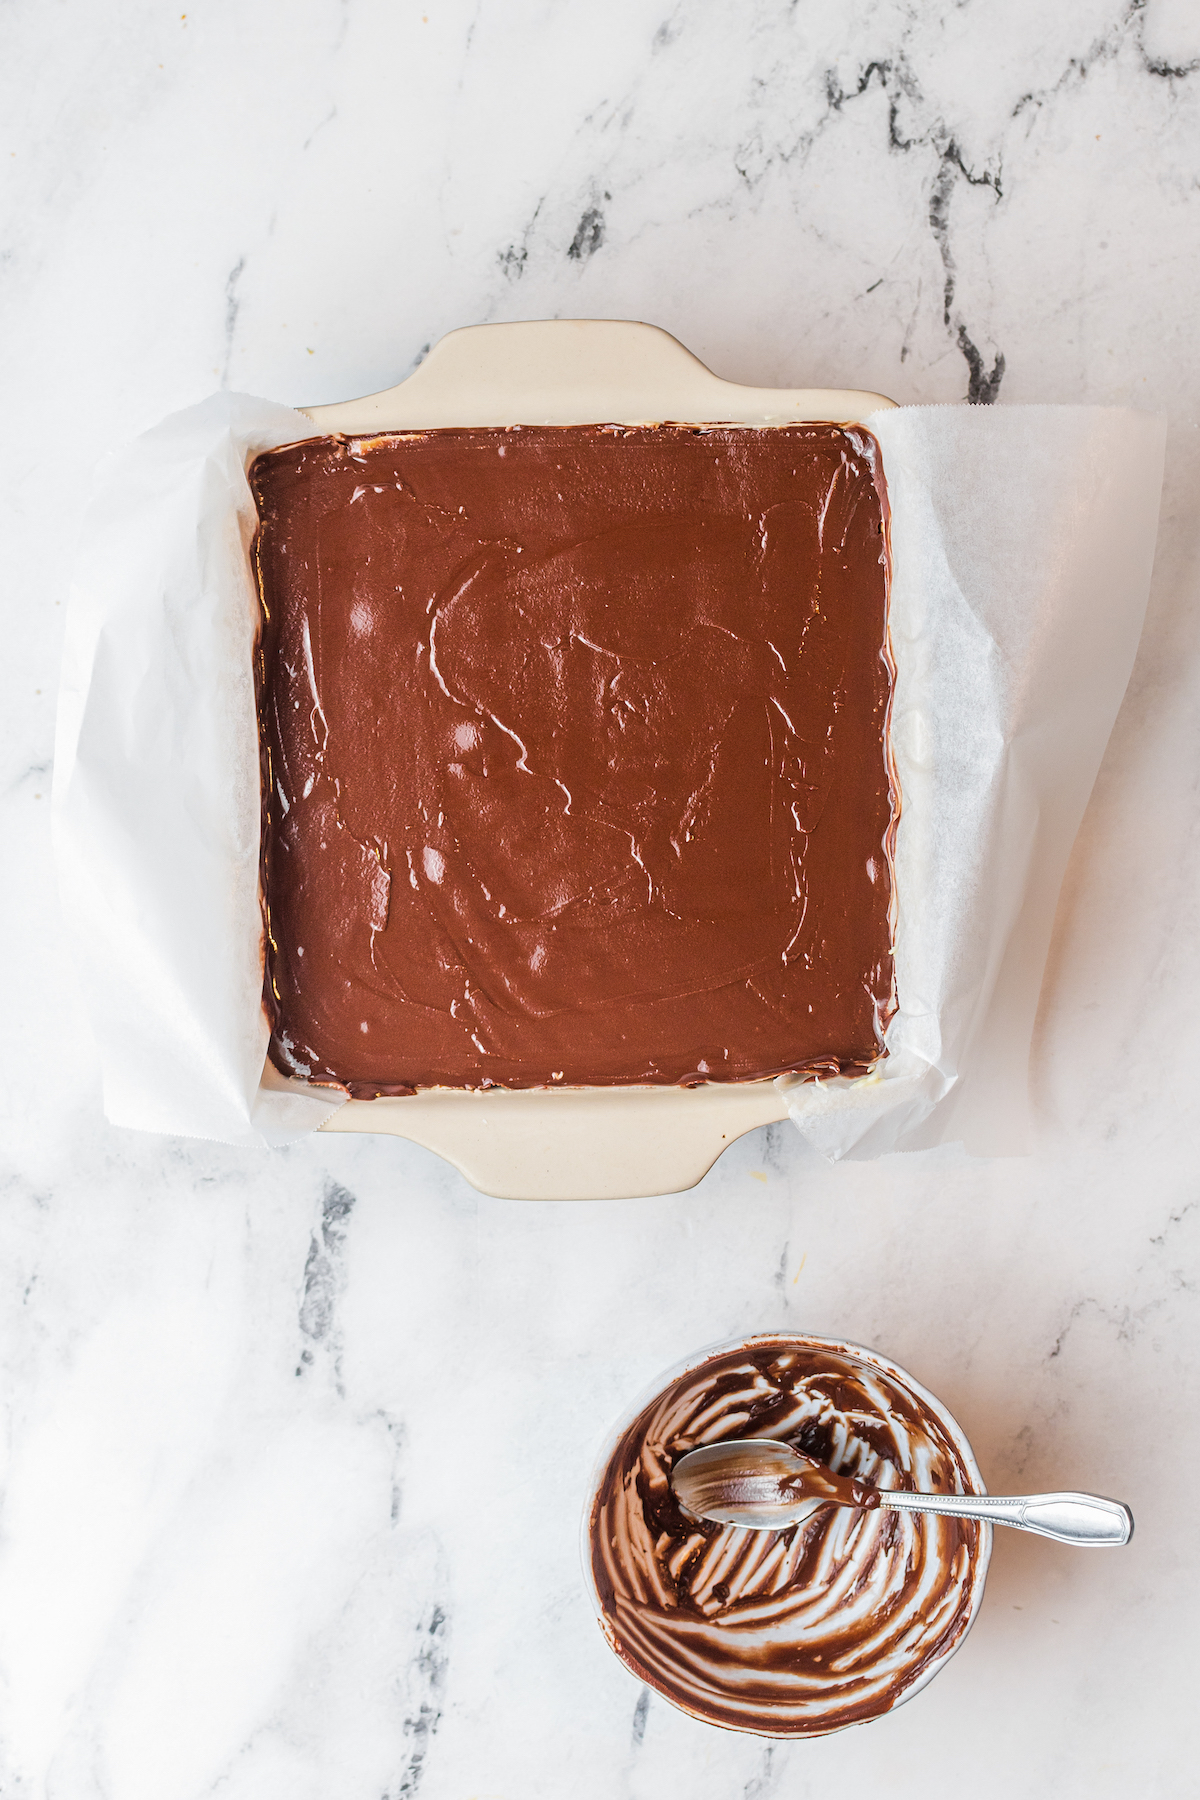 A square baking dish with a layer of melted chocolate topping visible inside. An empty, microwave-safe bowl with some chocolate still stuck to the sides sits on the countertop nearby.